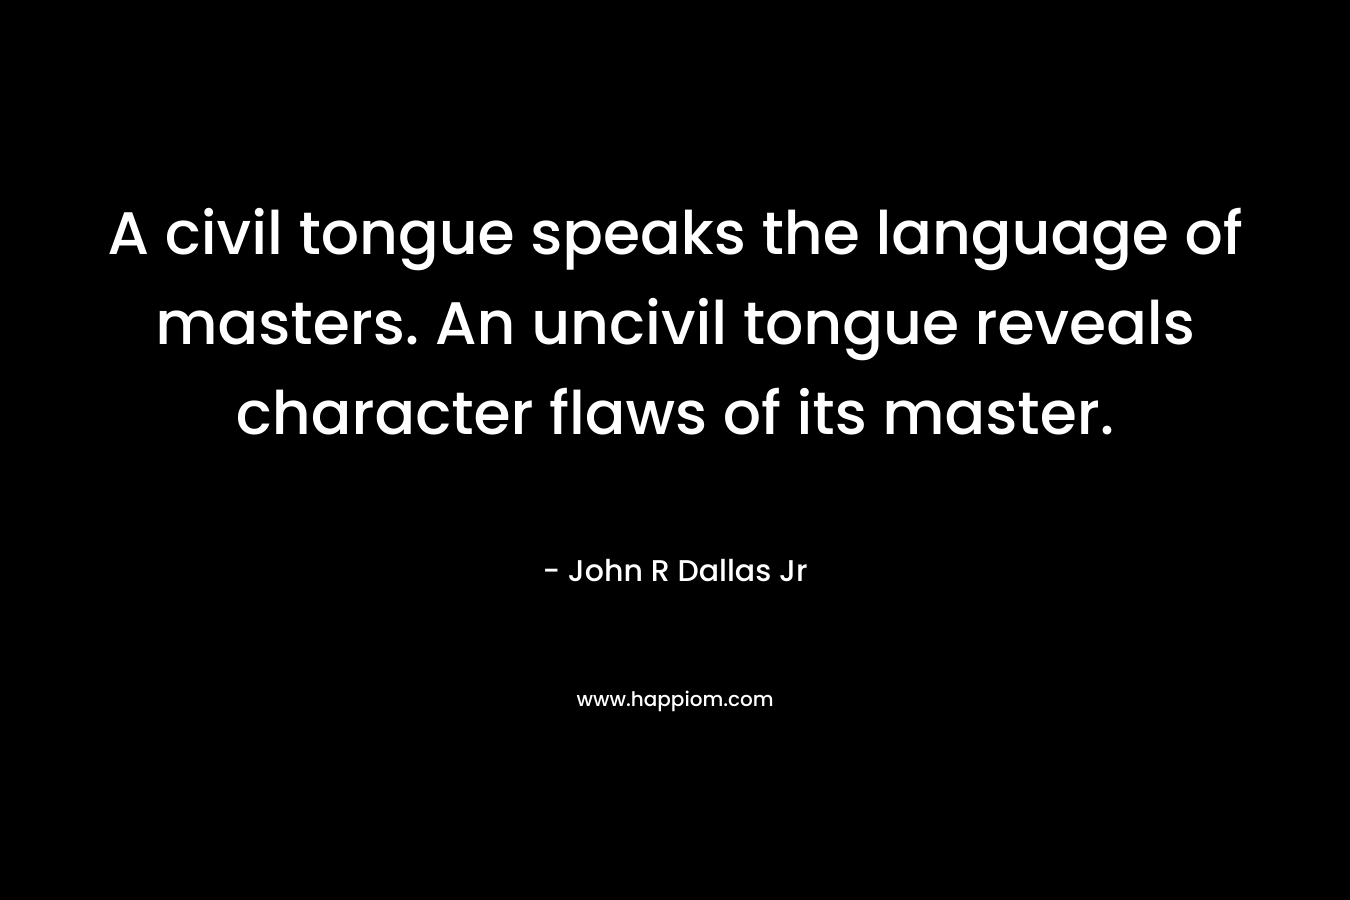 A civil tongue speaks the language of masters. An uncivil tongue reveals character flaws of its master. – John R Dallas Jr